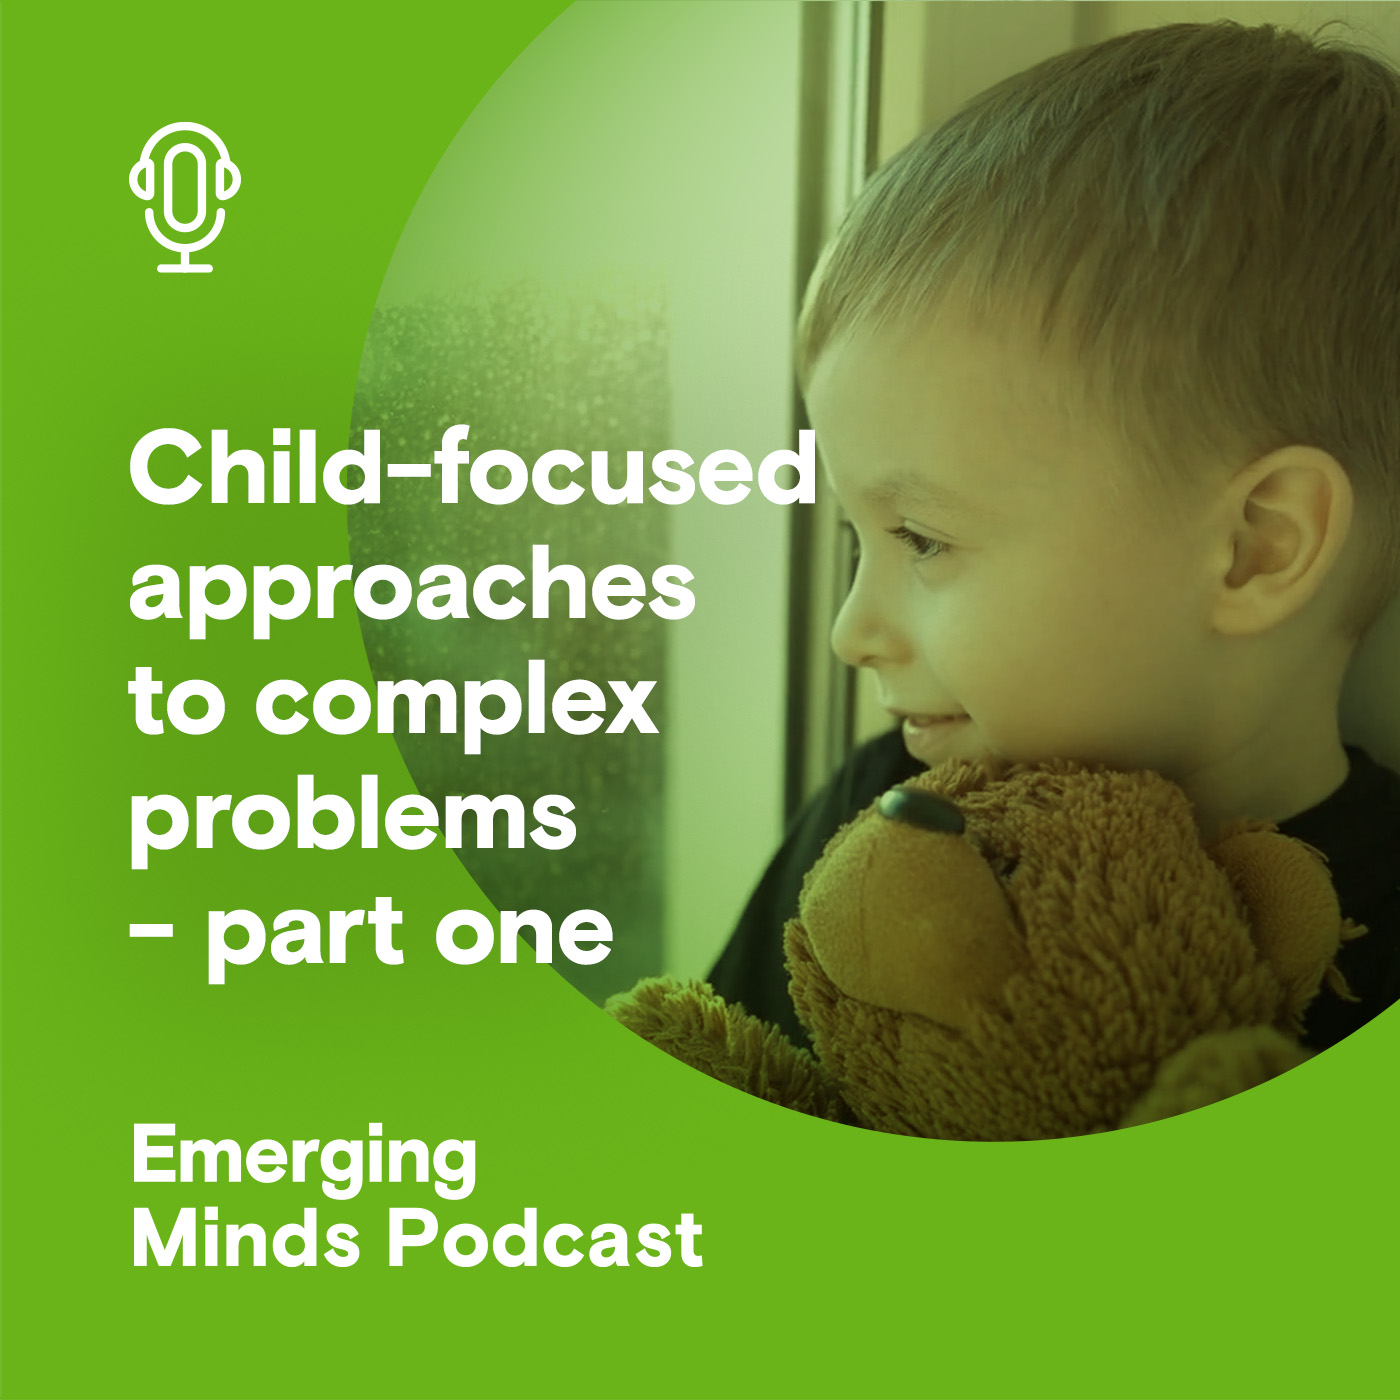 Child-focused approaches to complex problems - part one